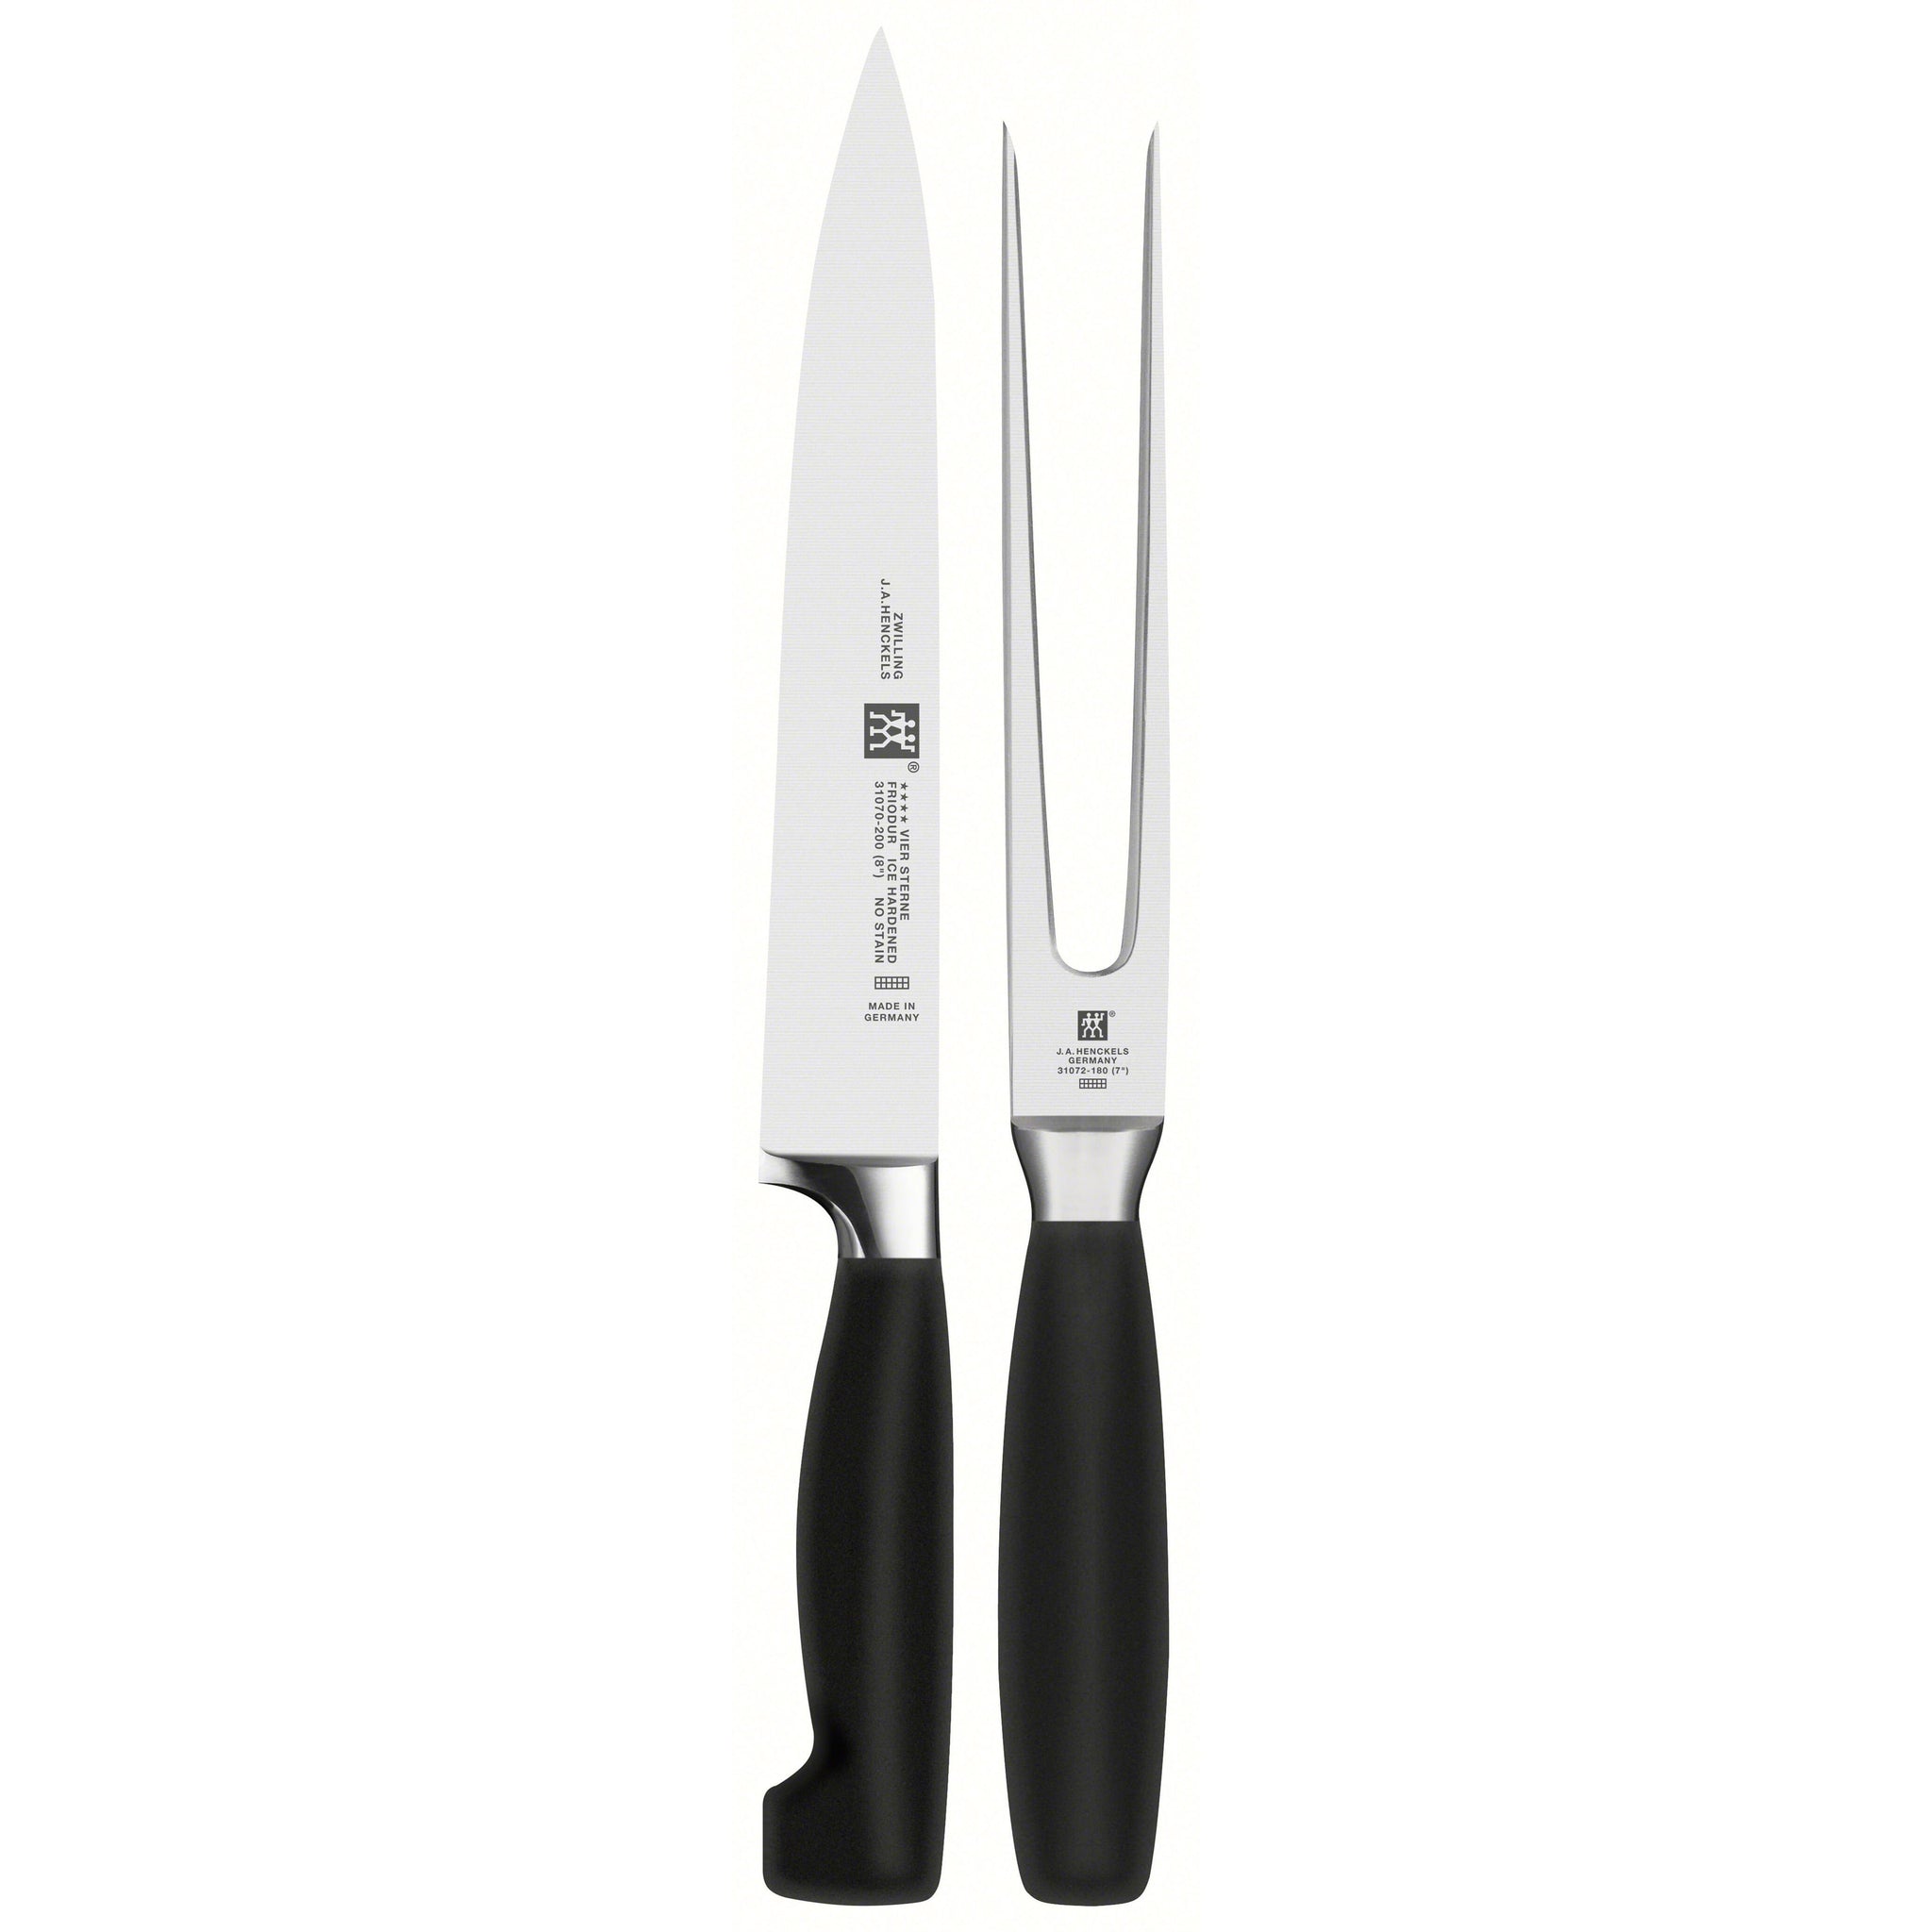 Zwilling Four Star 2pc Carving Set